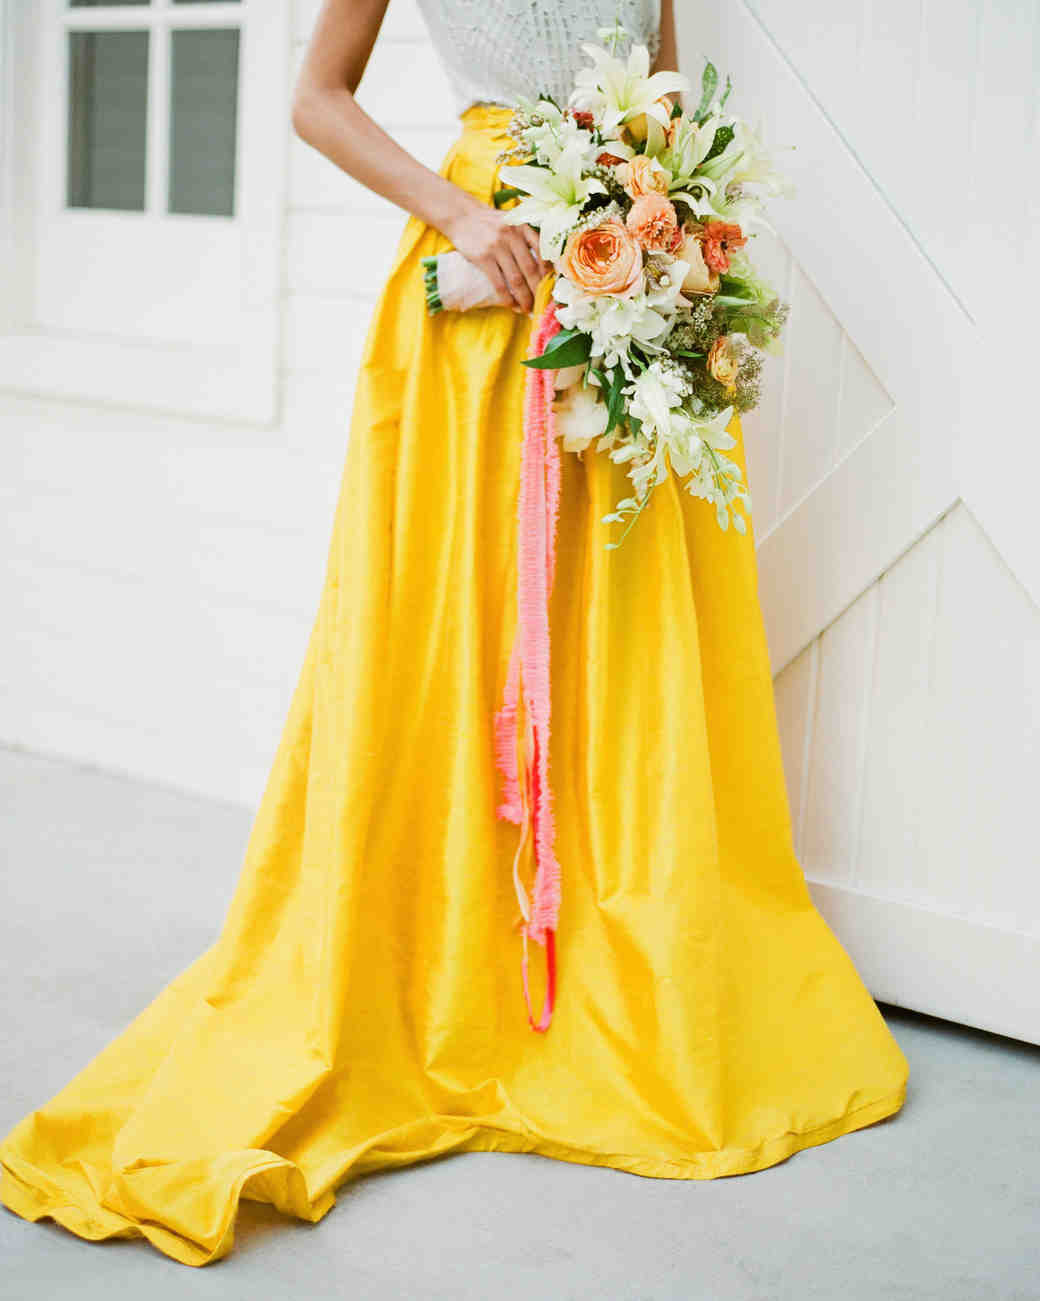 Yellow Dresses For Wedding
 24 Yellow Wedding Ideas That Will Make Your Day Bright and